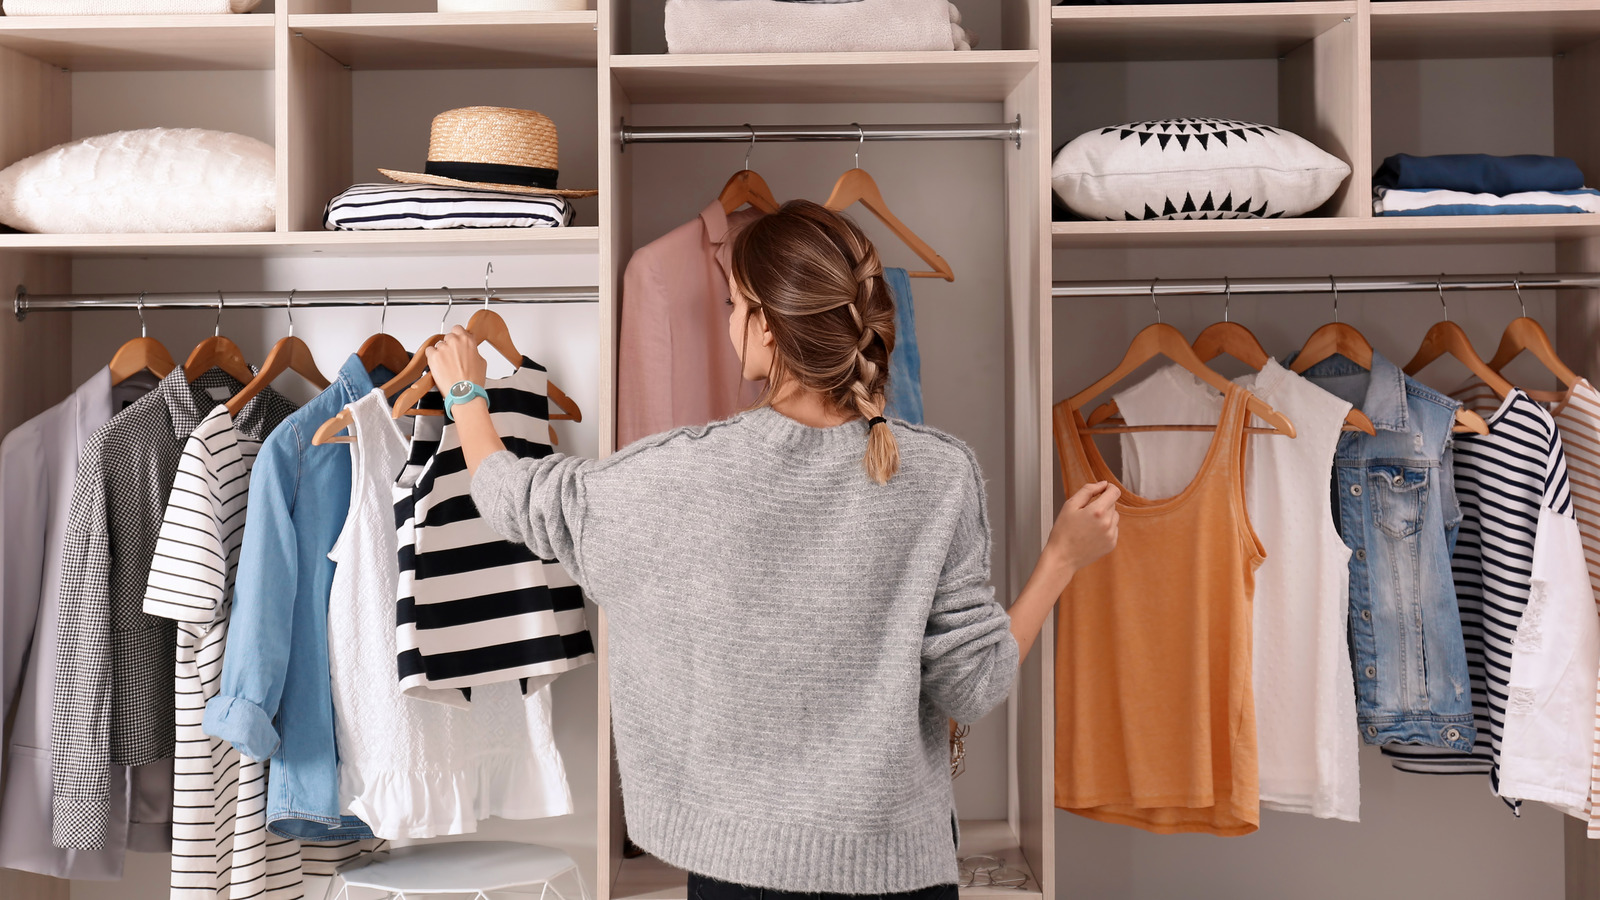 https://www.glam.com/img/gallery/13-ways-to-declutter-and-organize-your-closet/l-intro-1692221594.jpg